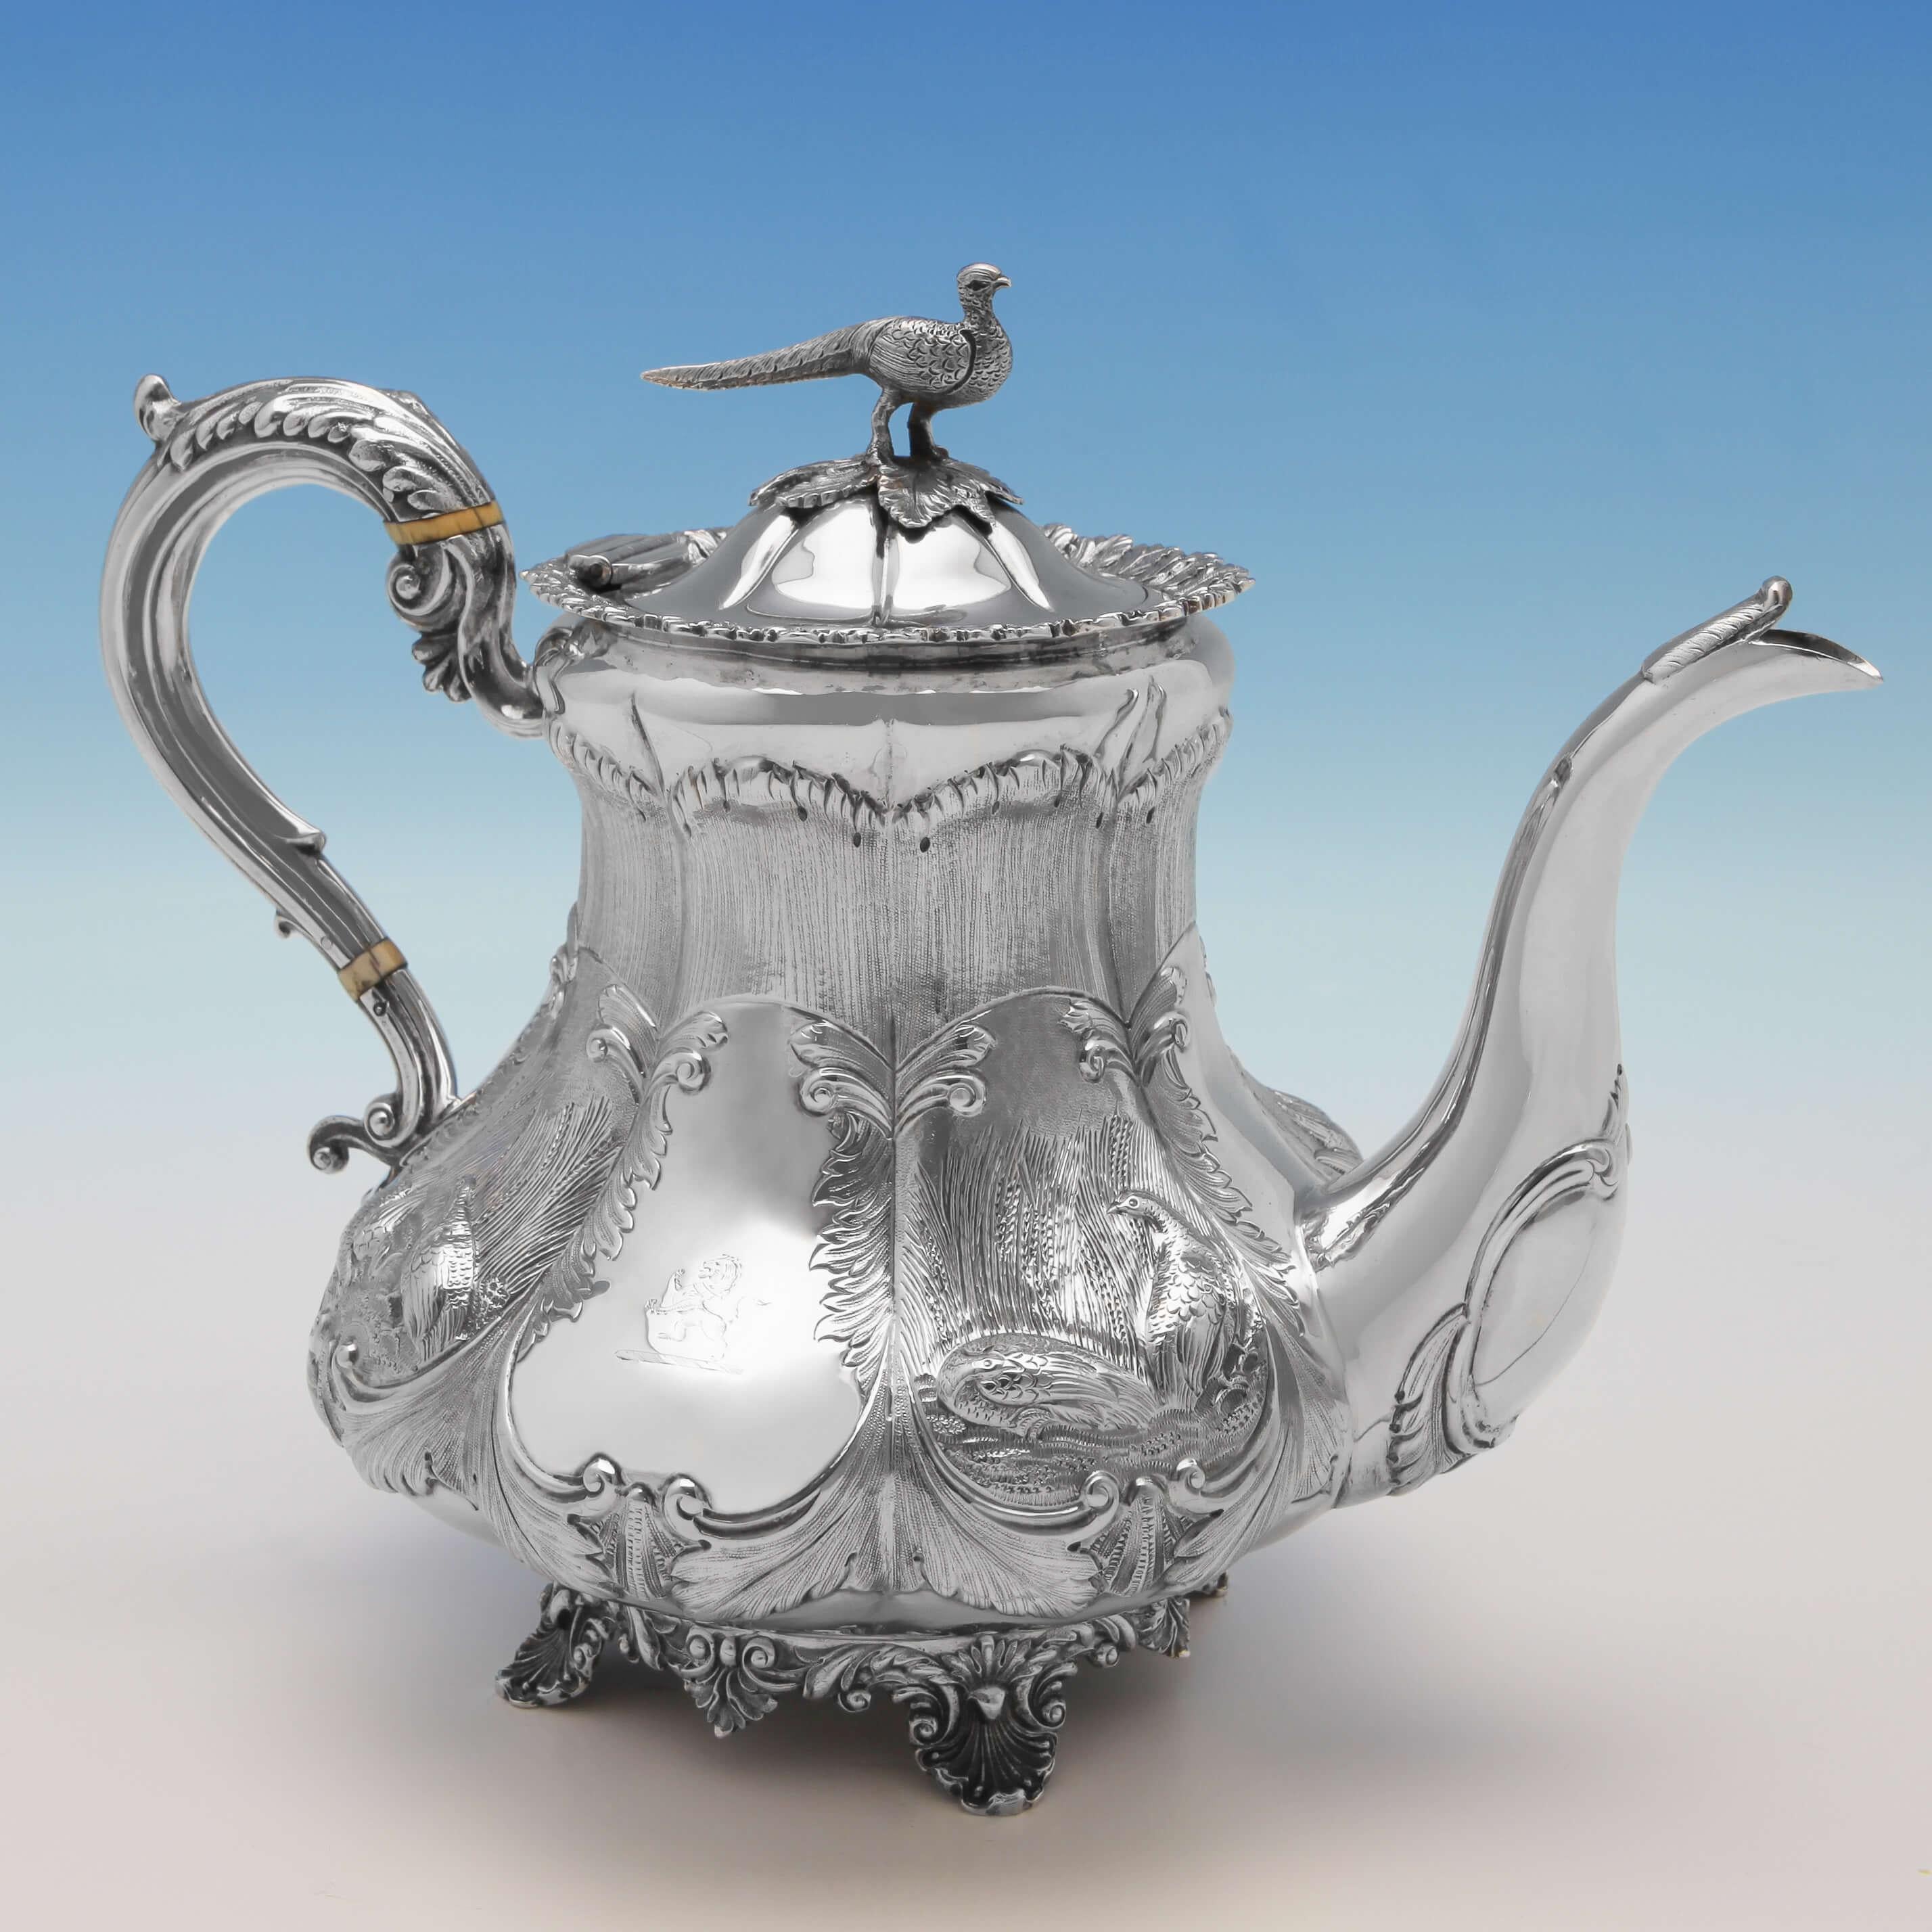 Hallmarked in London in 1836 by Benjamin Stephens, this impressive, William IV Antique, sterling silver 3 piece tea set, has a melon shaped body chased with scenes depicting pheasants in woodland, and acanthus and scroll work. The set features